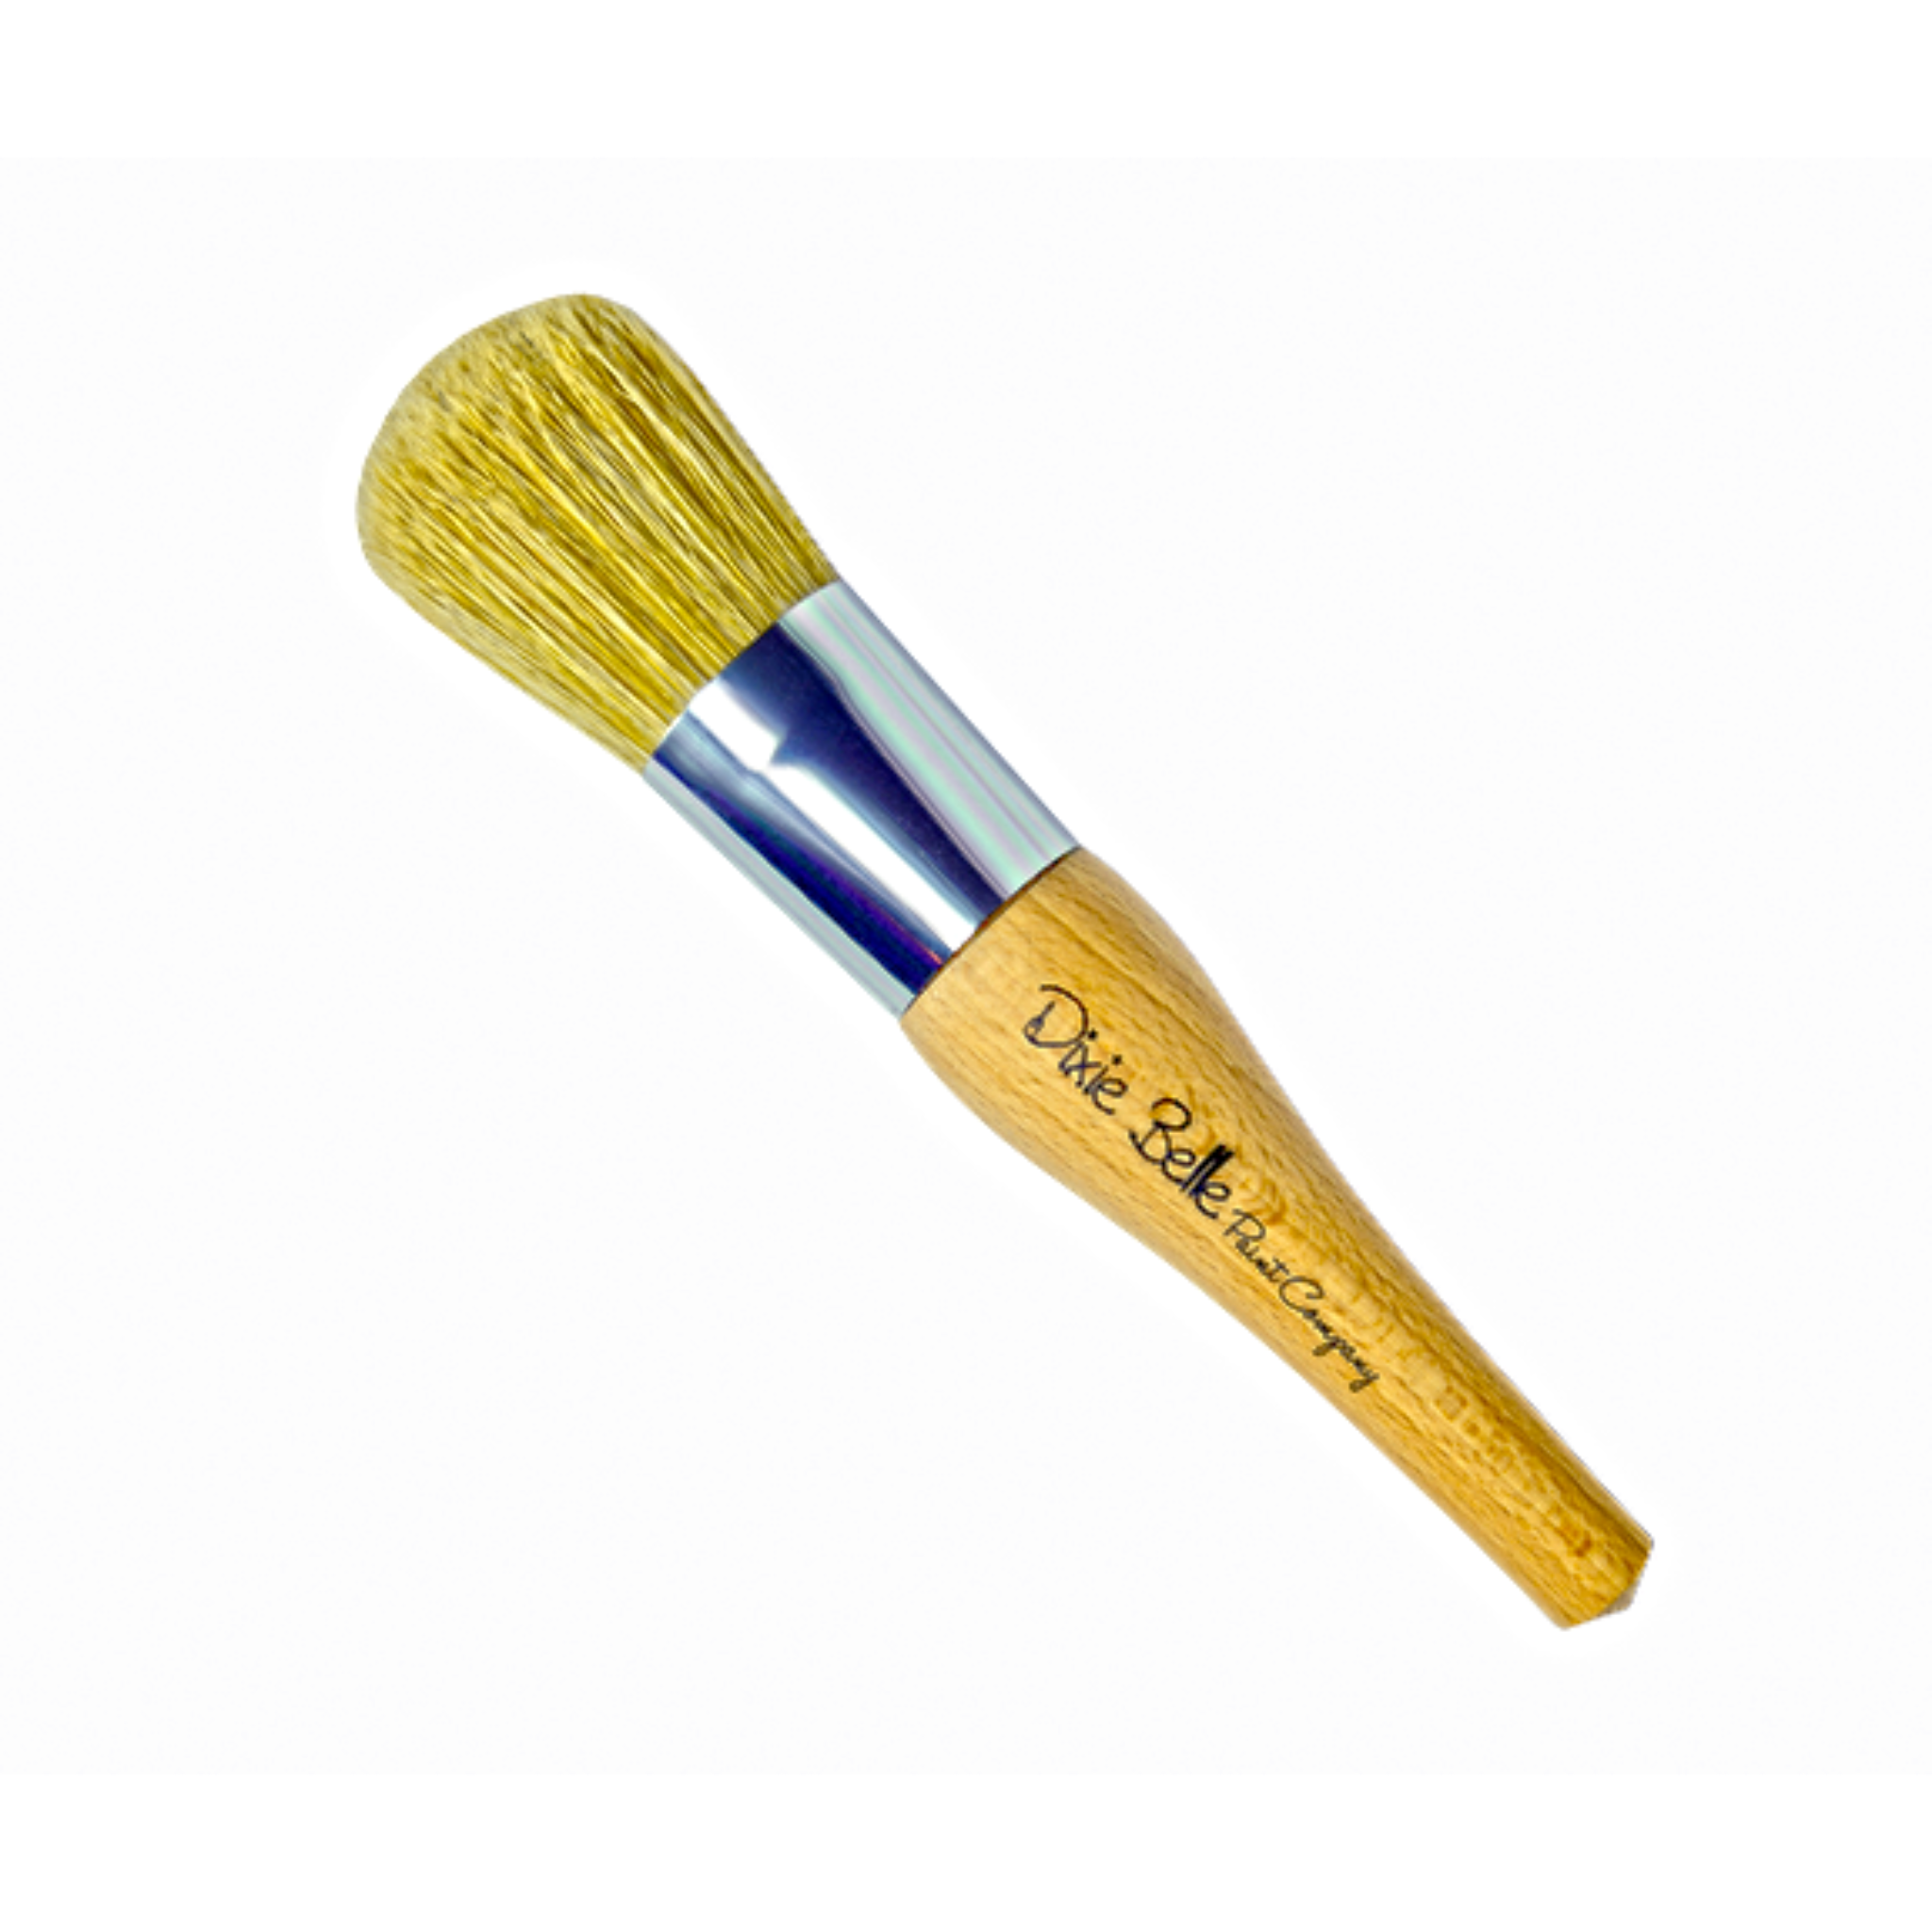 Dixie Belle's The Belle Paint Brush is against a white background.  Its distinctive belle design offers a comfortable grip and tapered edges, making it the ideal partner for achieving stunning, polished finishes.